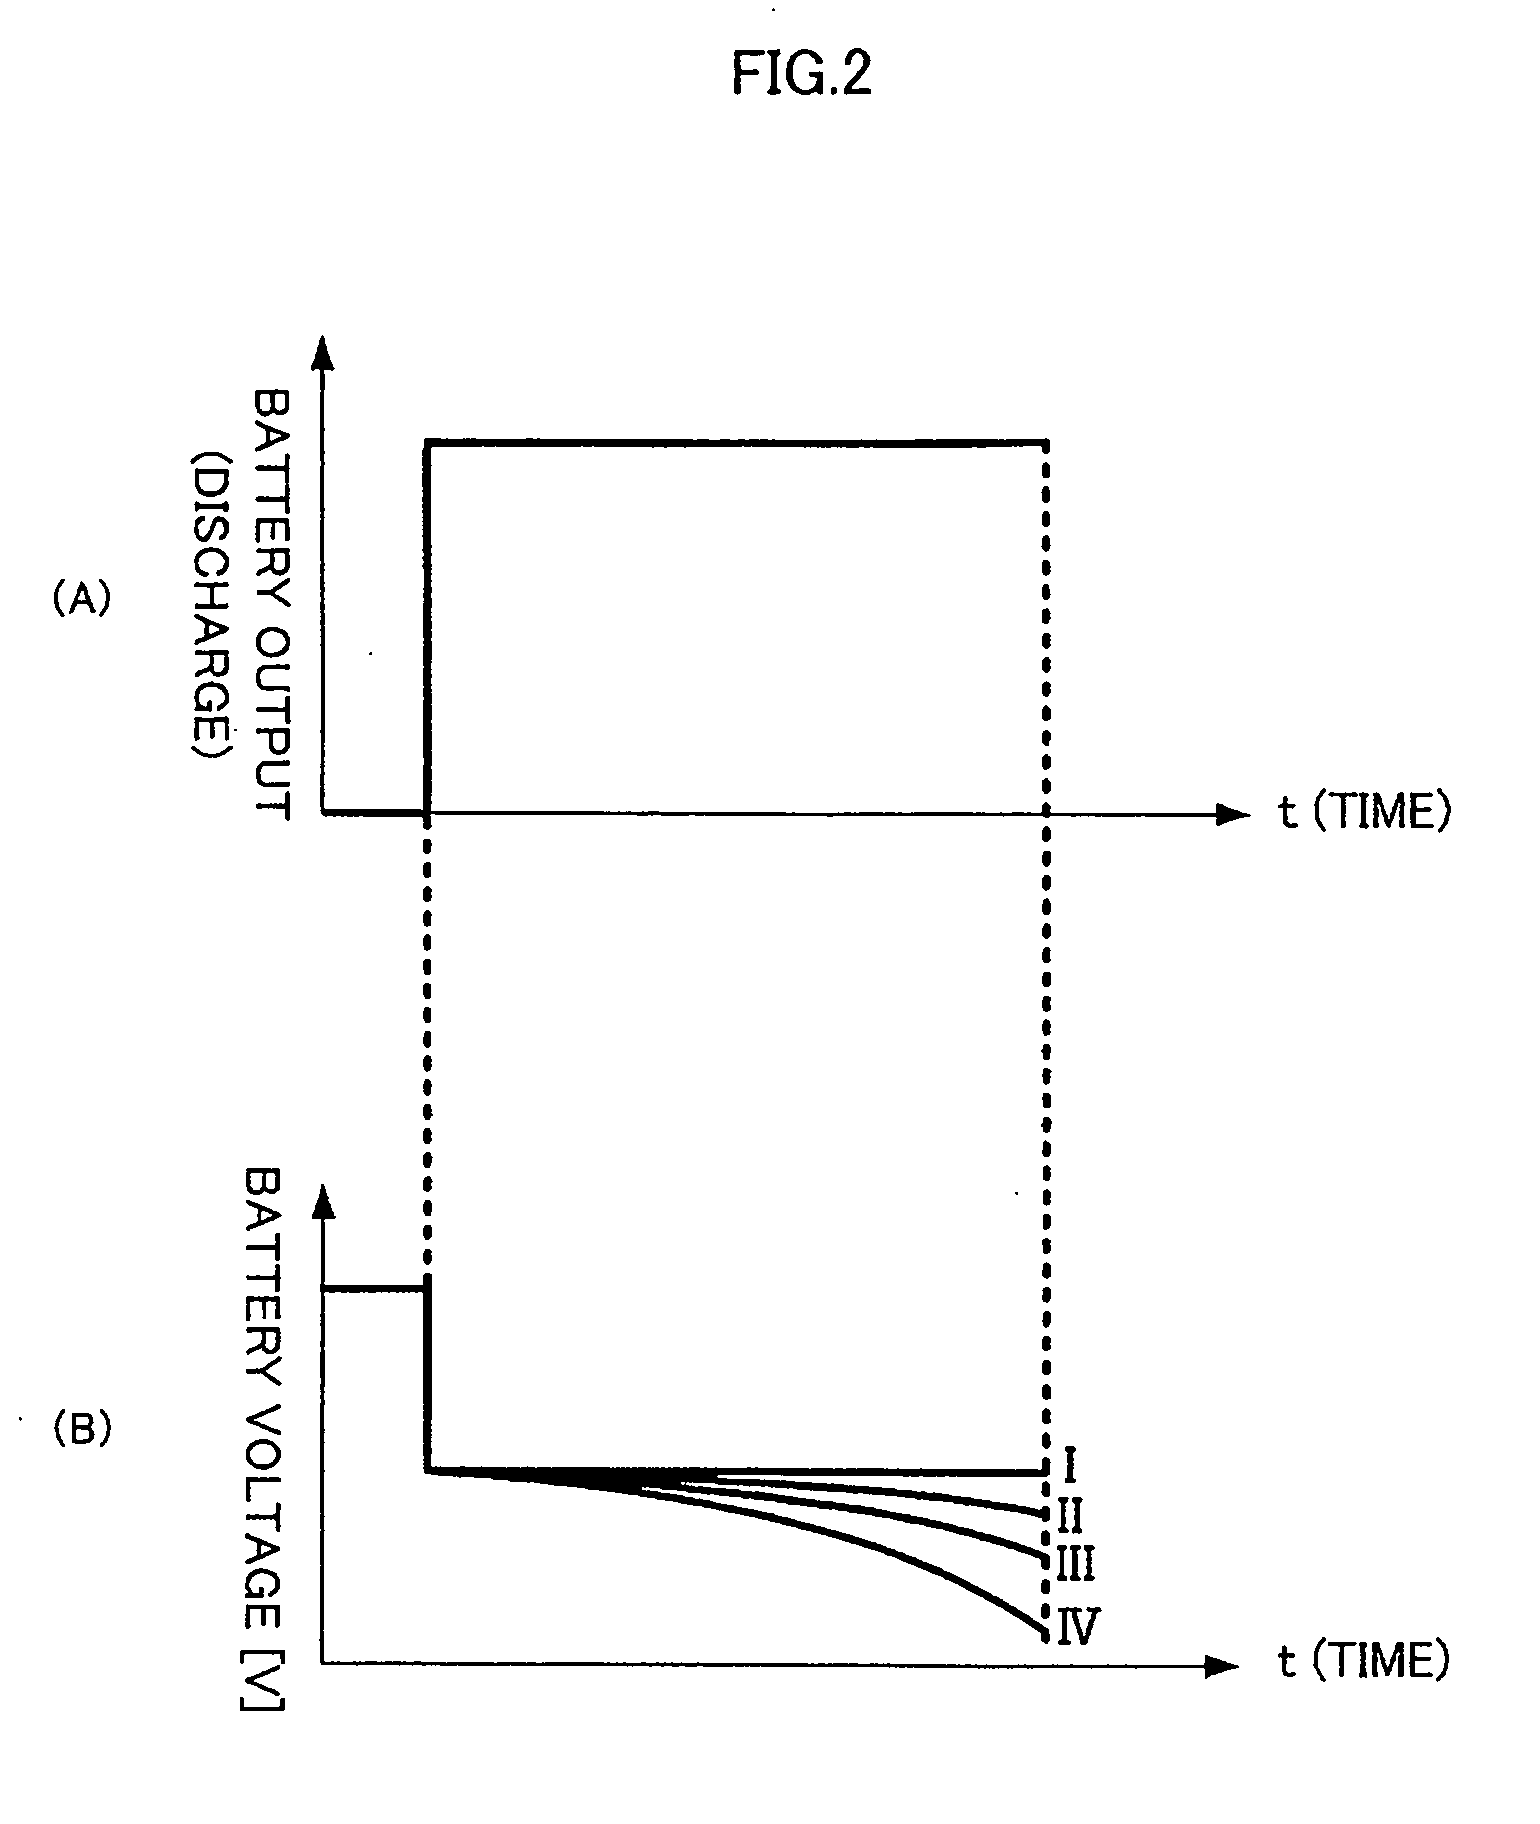 Degradation determination method for lithium-ion battery, control method for lithium-ion battery, degradation determination apparatus for lithium-ion battery, control apparatus for lithium-ion battery, and vehicle